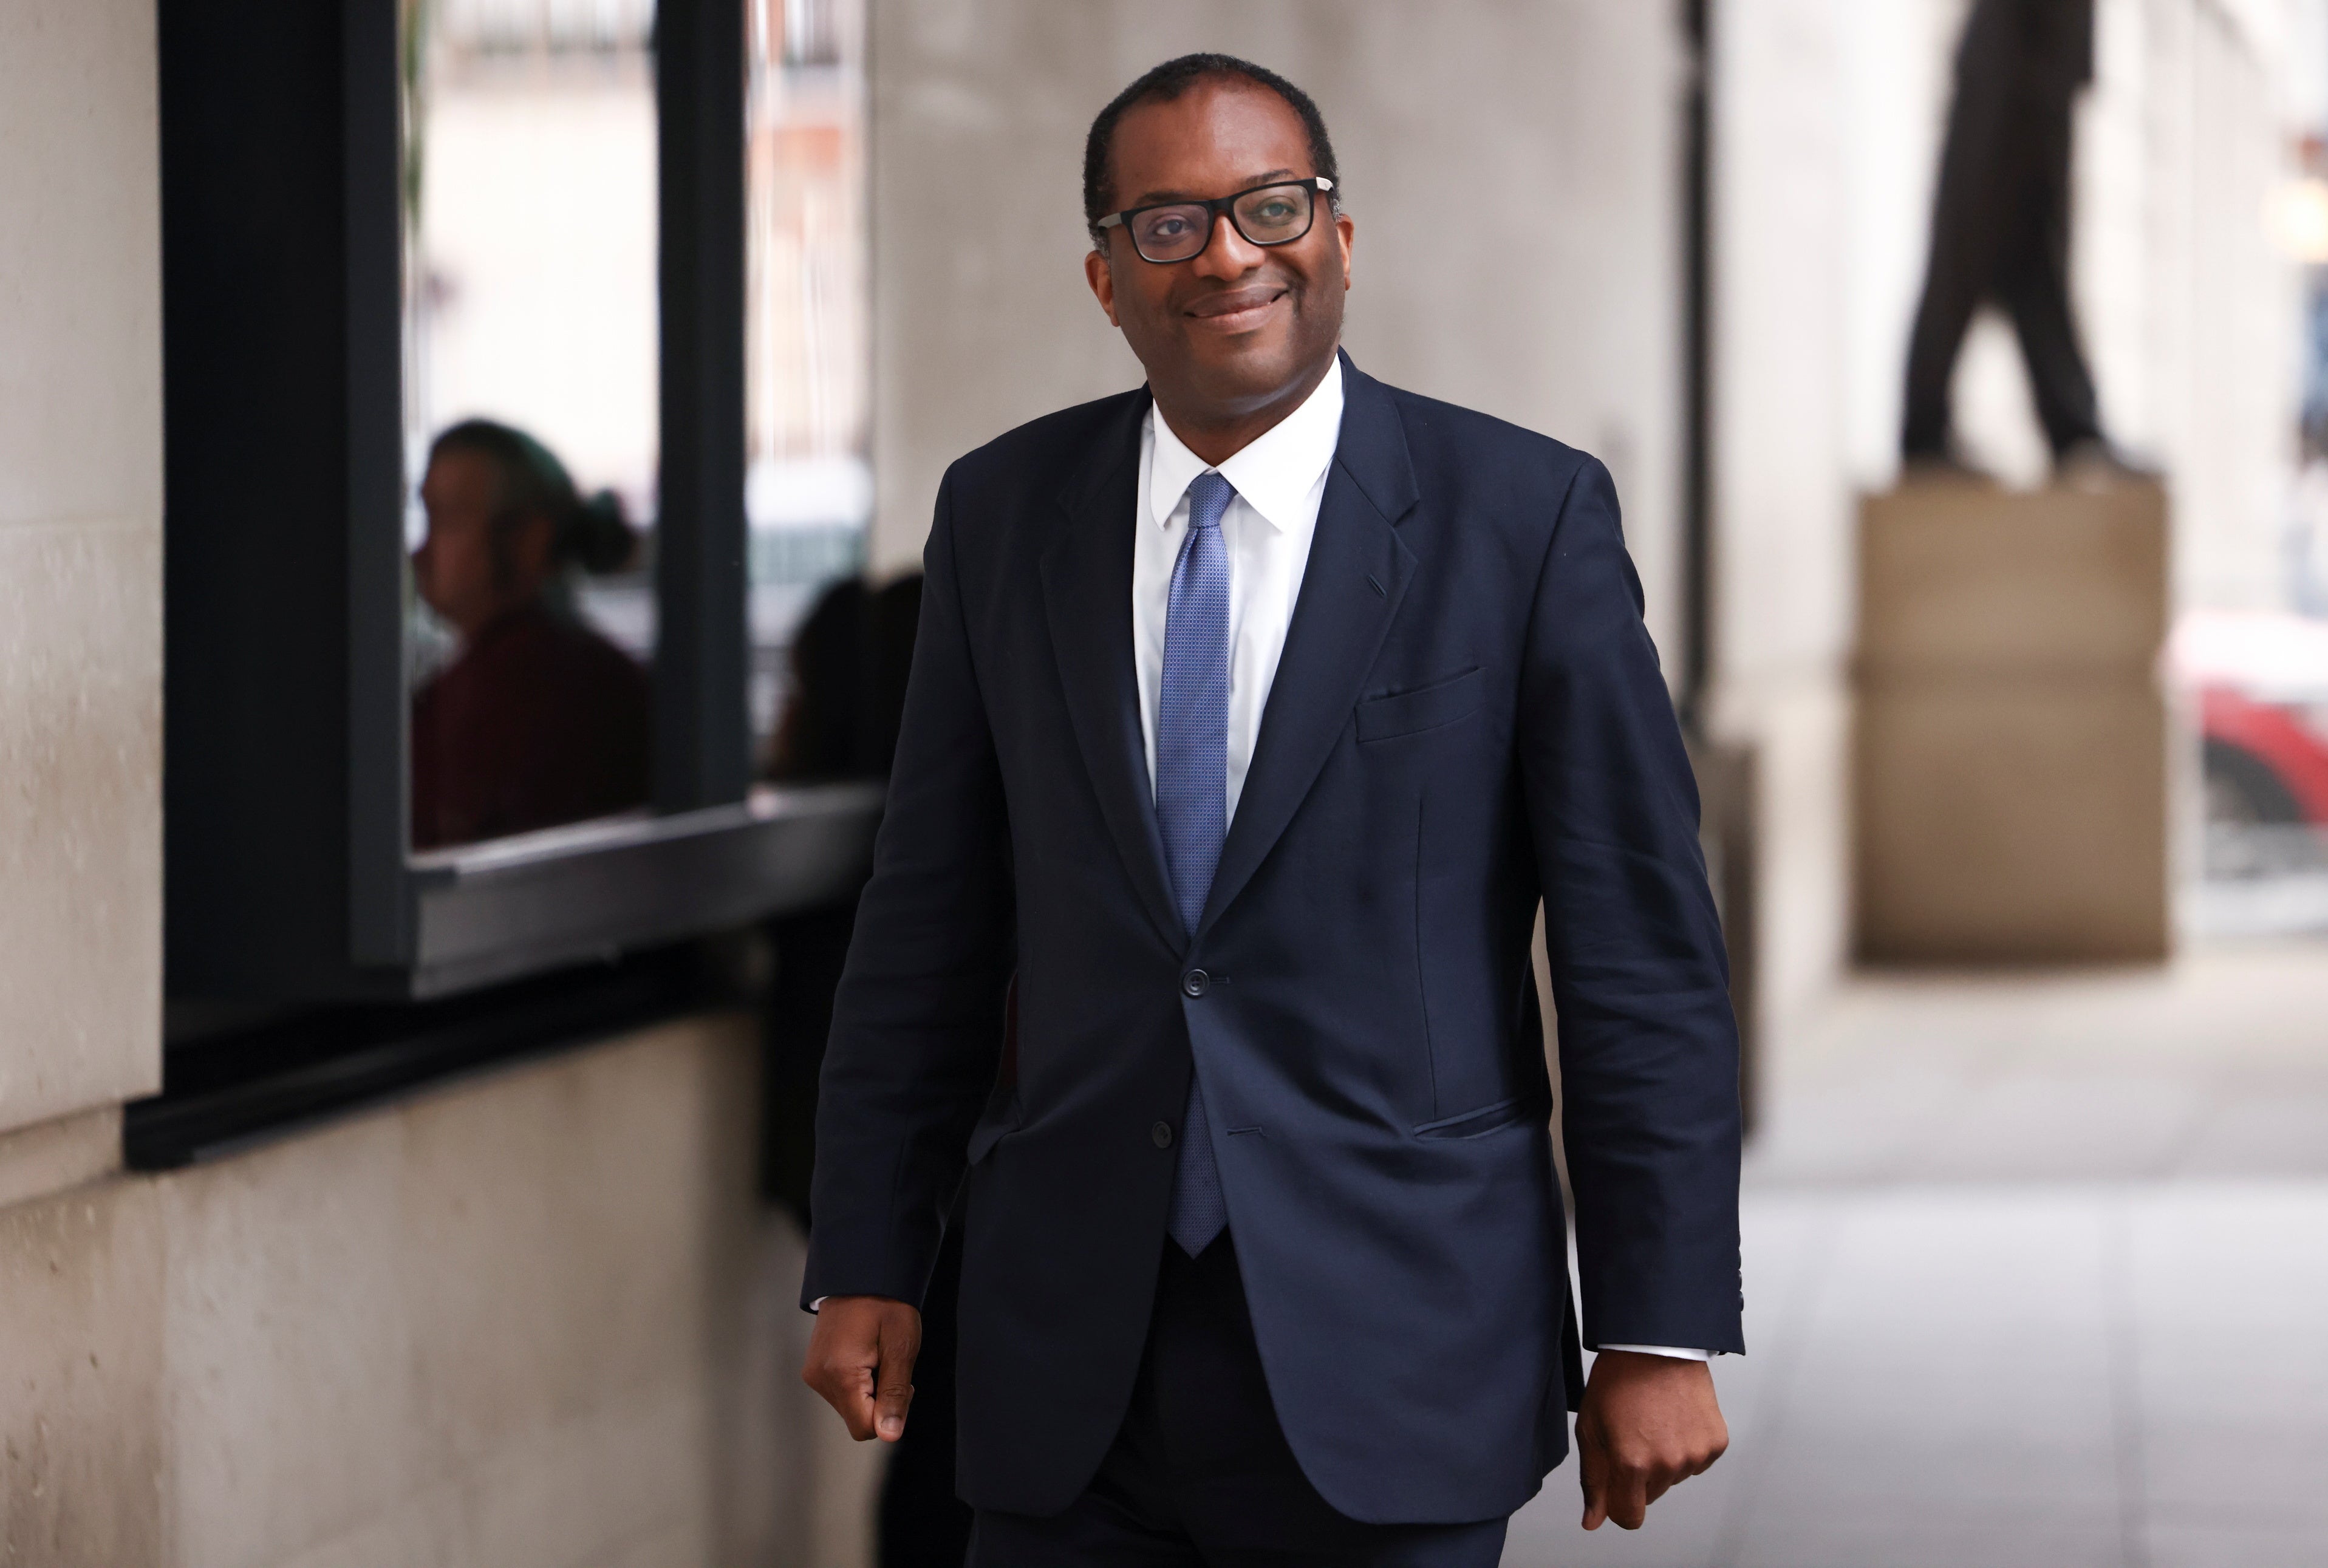 Downing Street has supported the business secretary, Kwasi Kwarteng